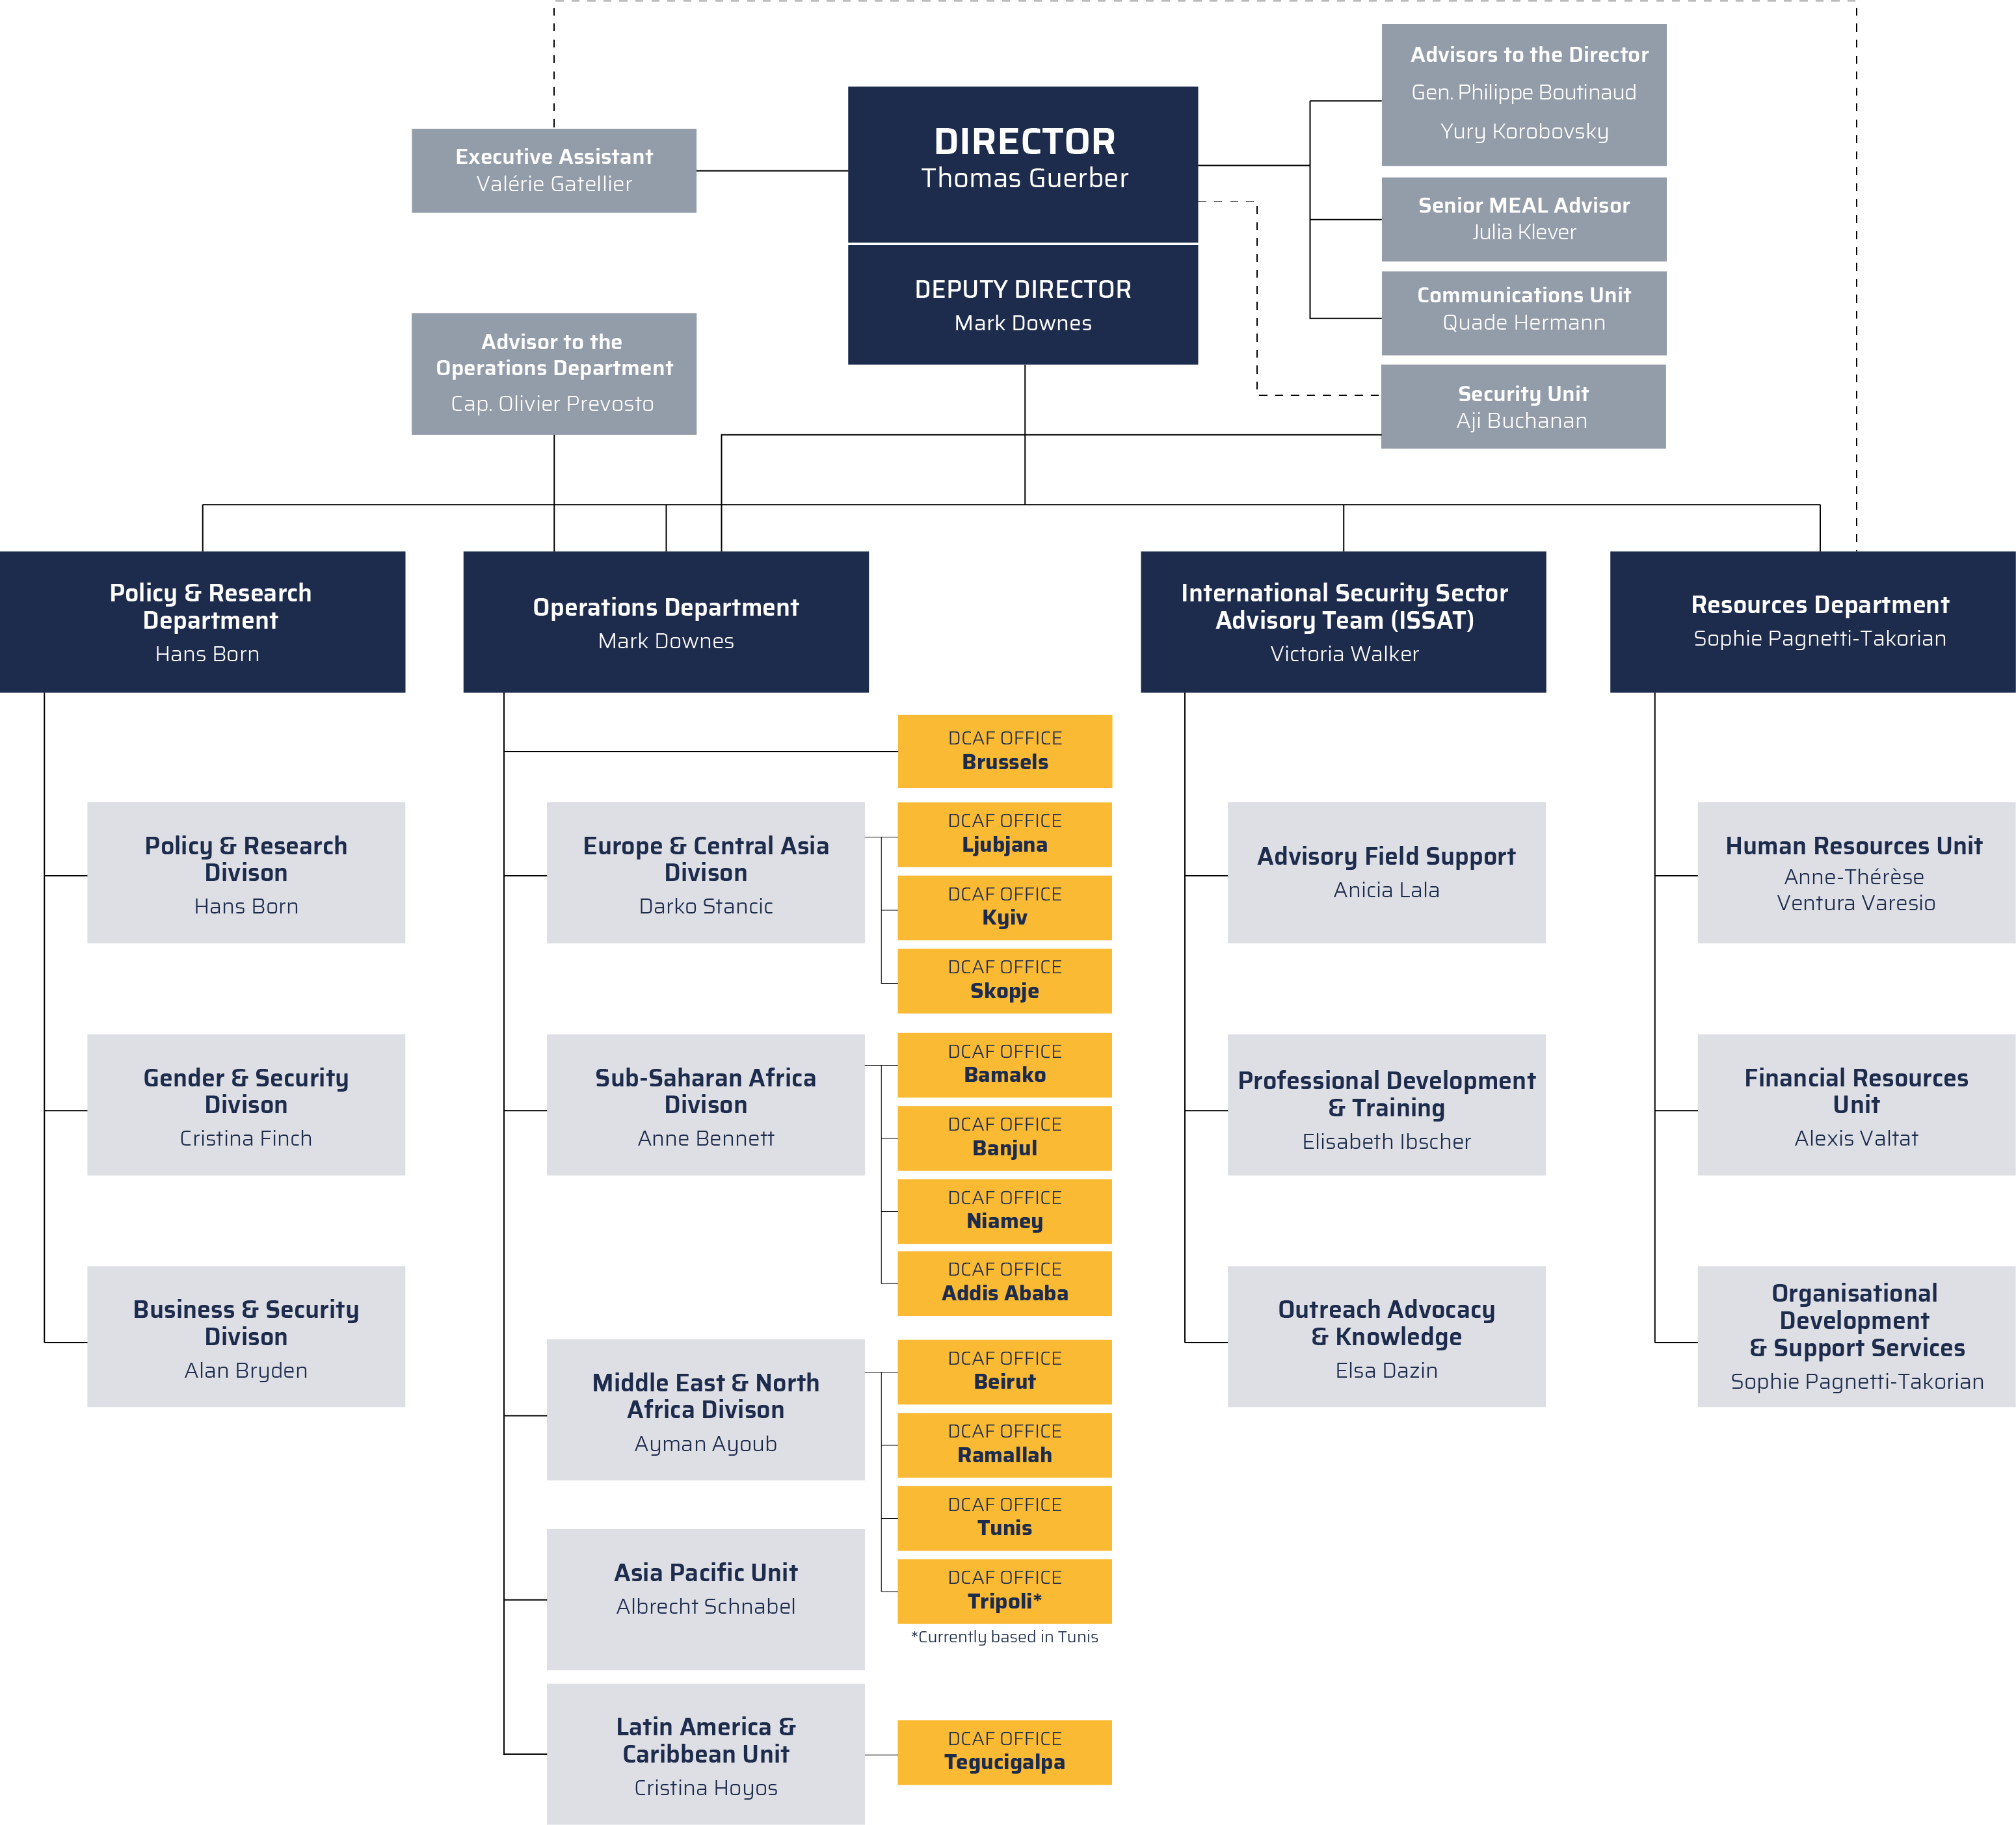 Organisation_Structure_Oct2021-2.png